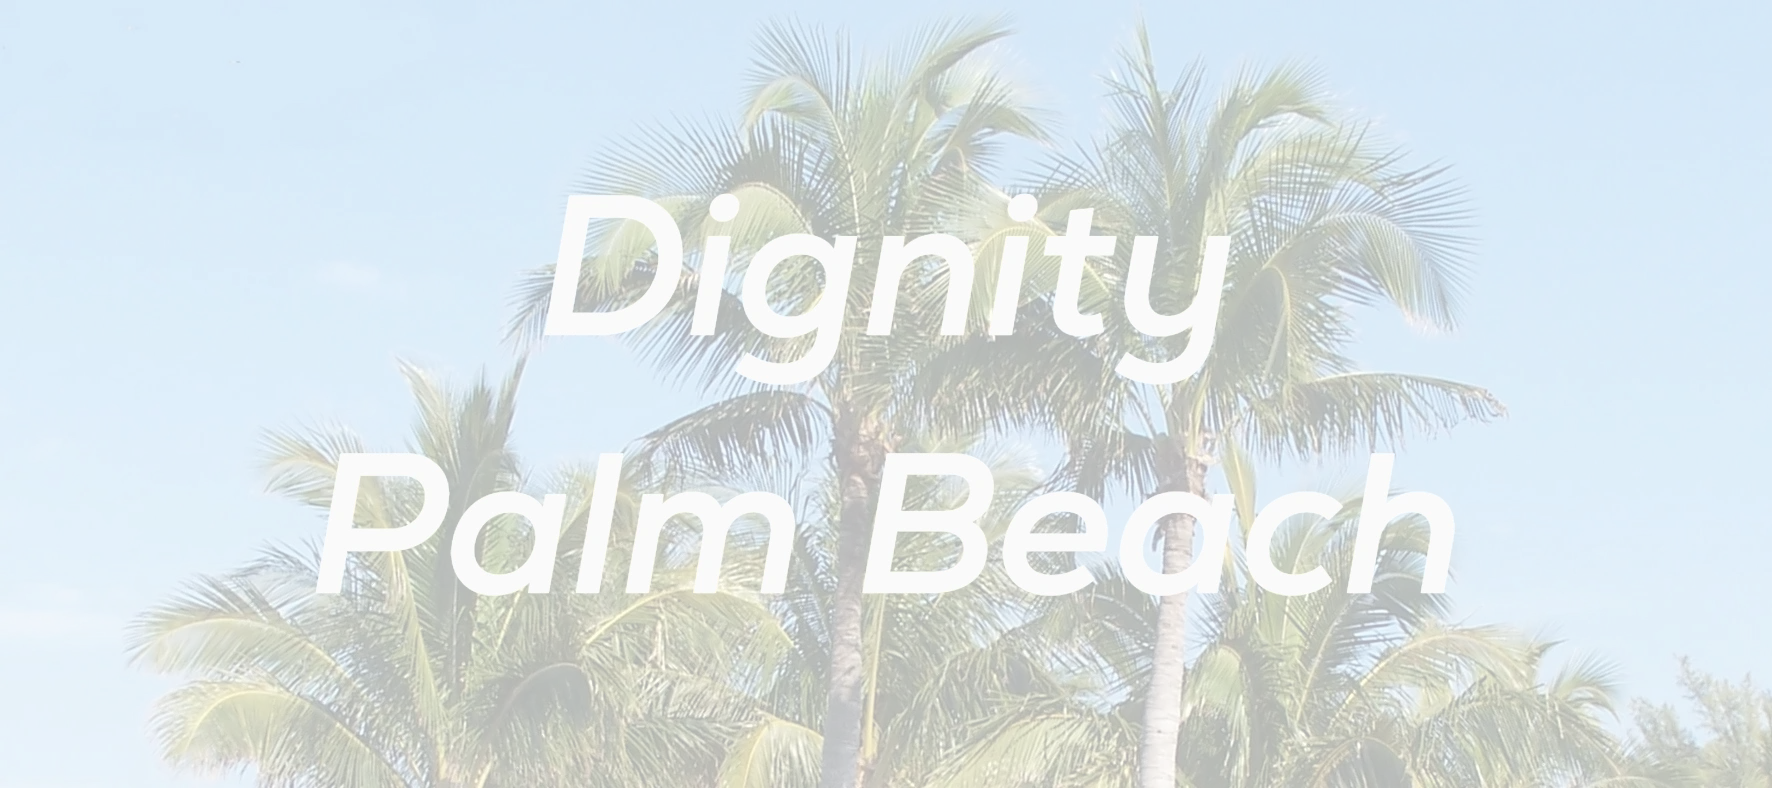 (c) Dignitypalmbeach.org